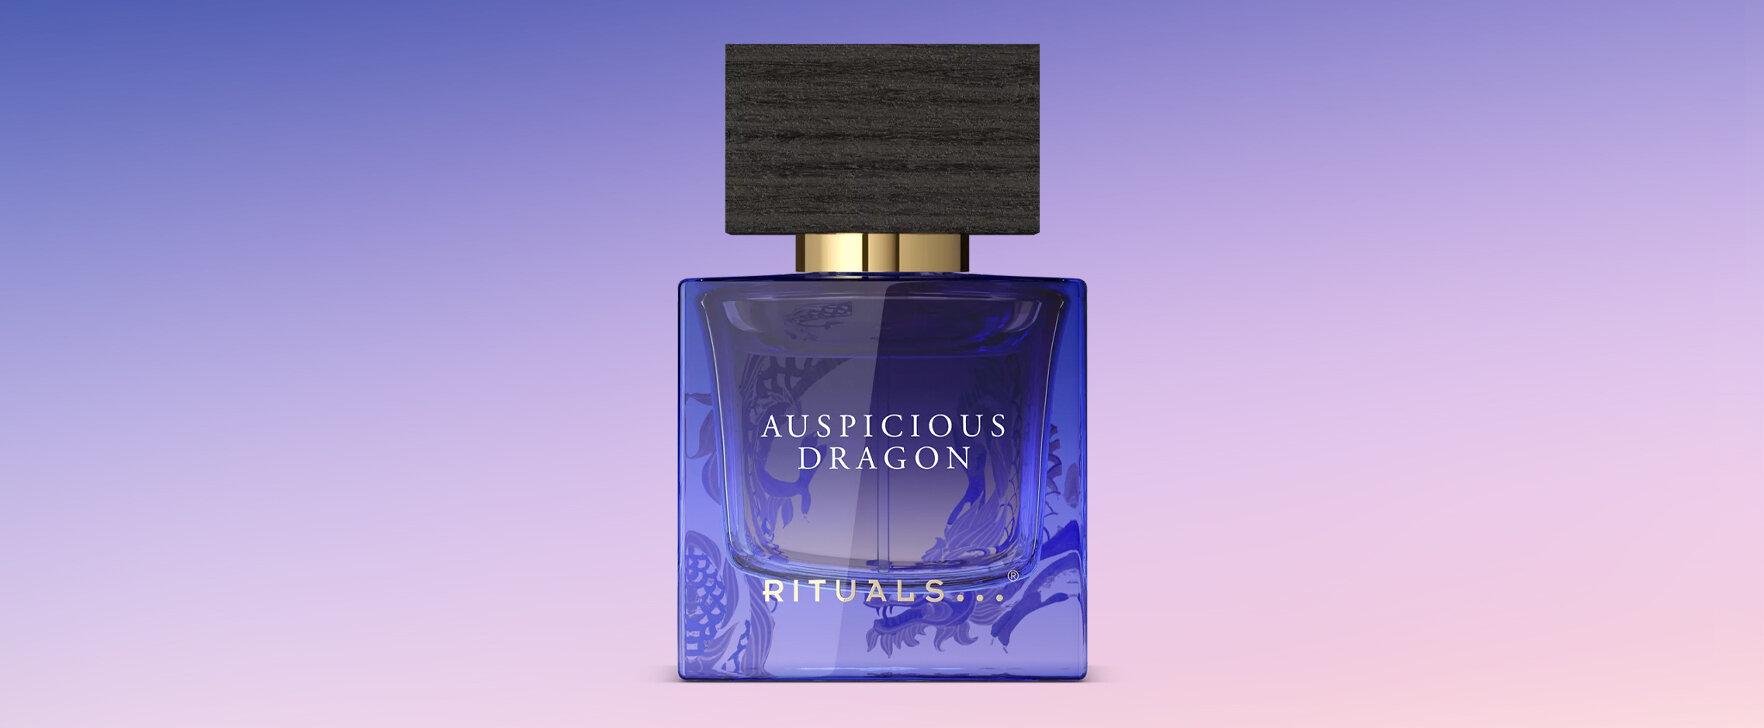 Inspired by Chinese Mythology: The Limited Unisex Fragrance Auspicious Dragon From Rituals